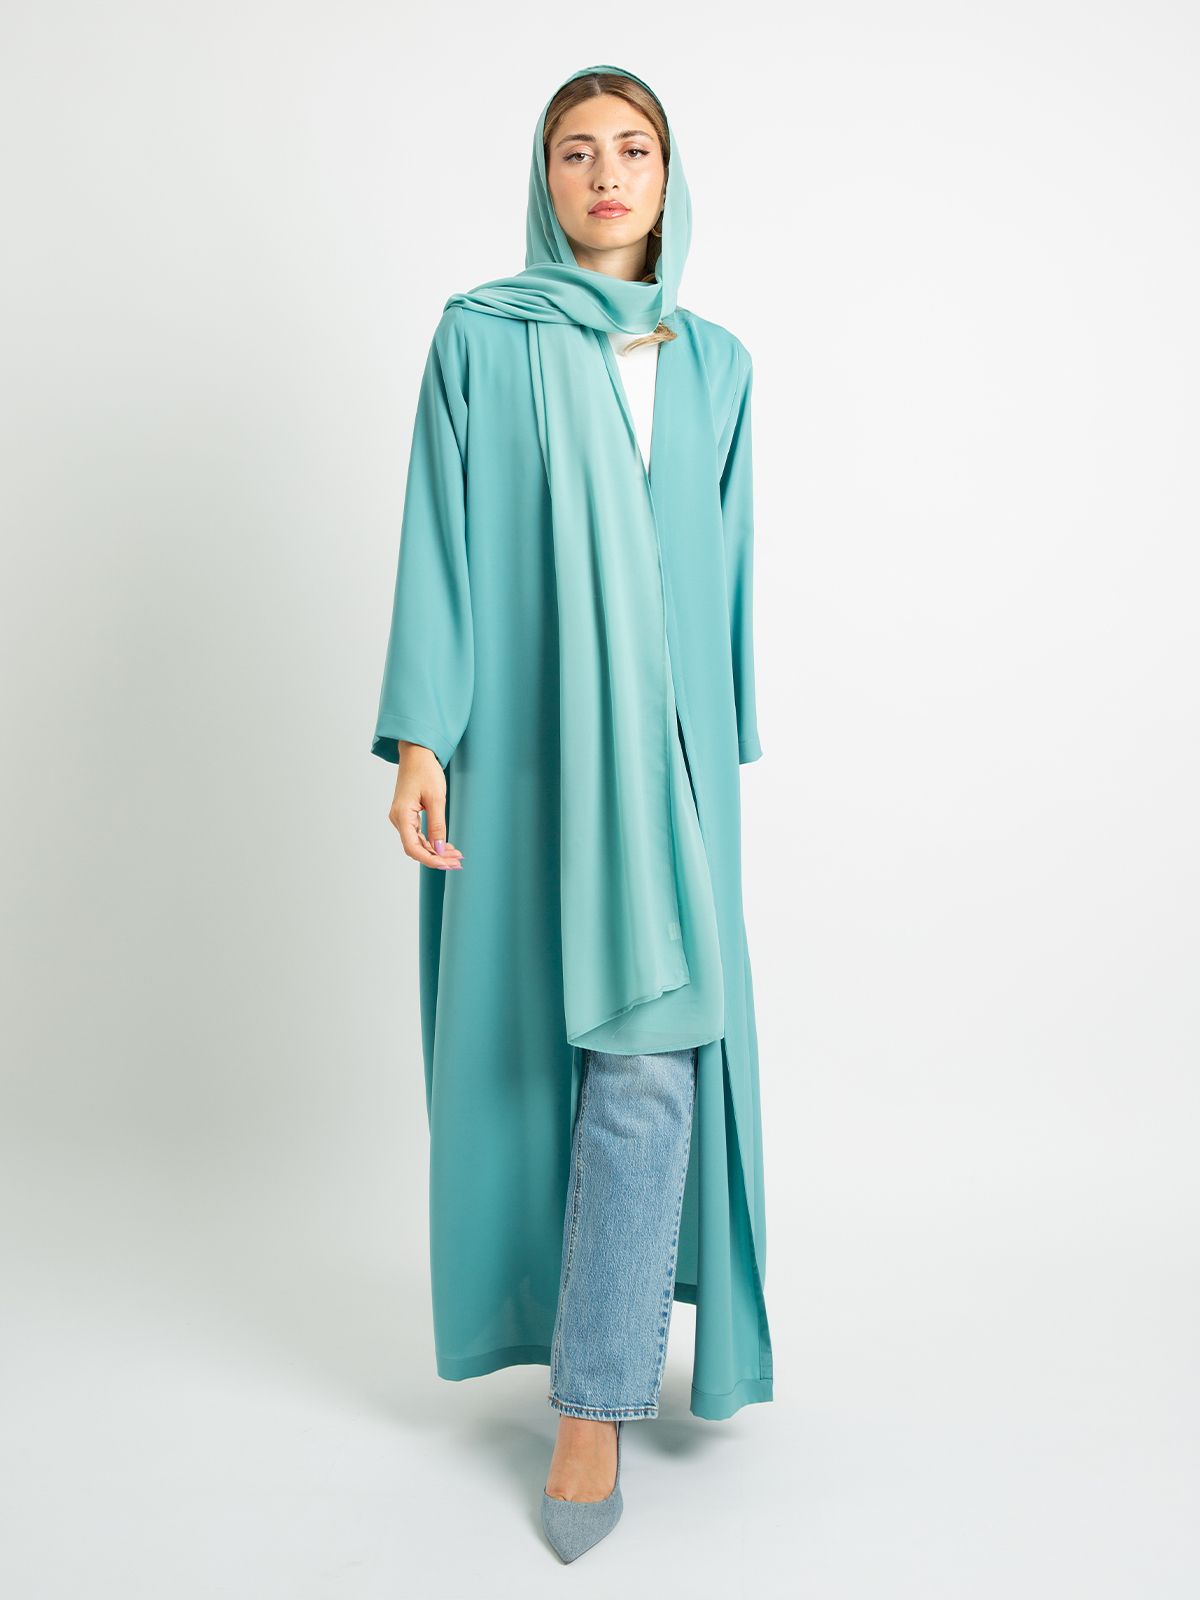 Tiffany long regular fit abaya in high quality light fabric by kaafmeem for work and everyday wear 